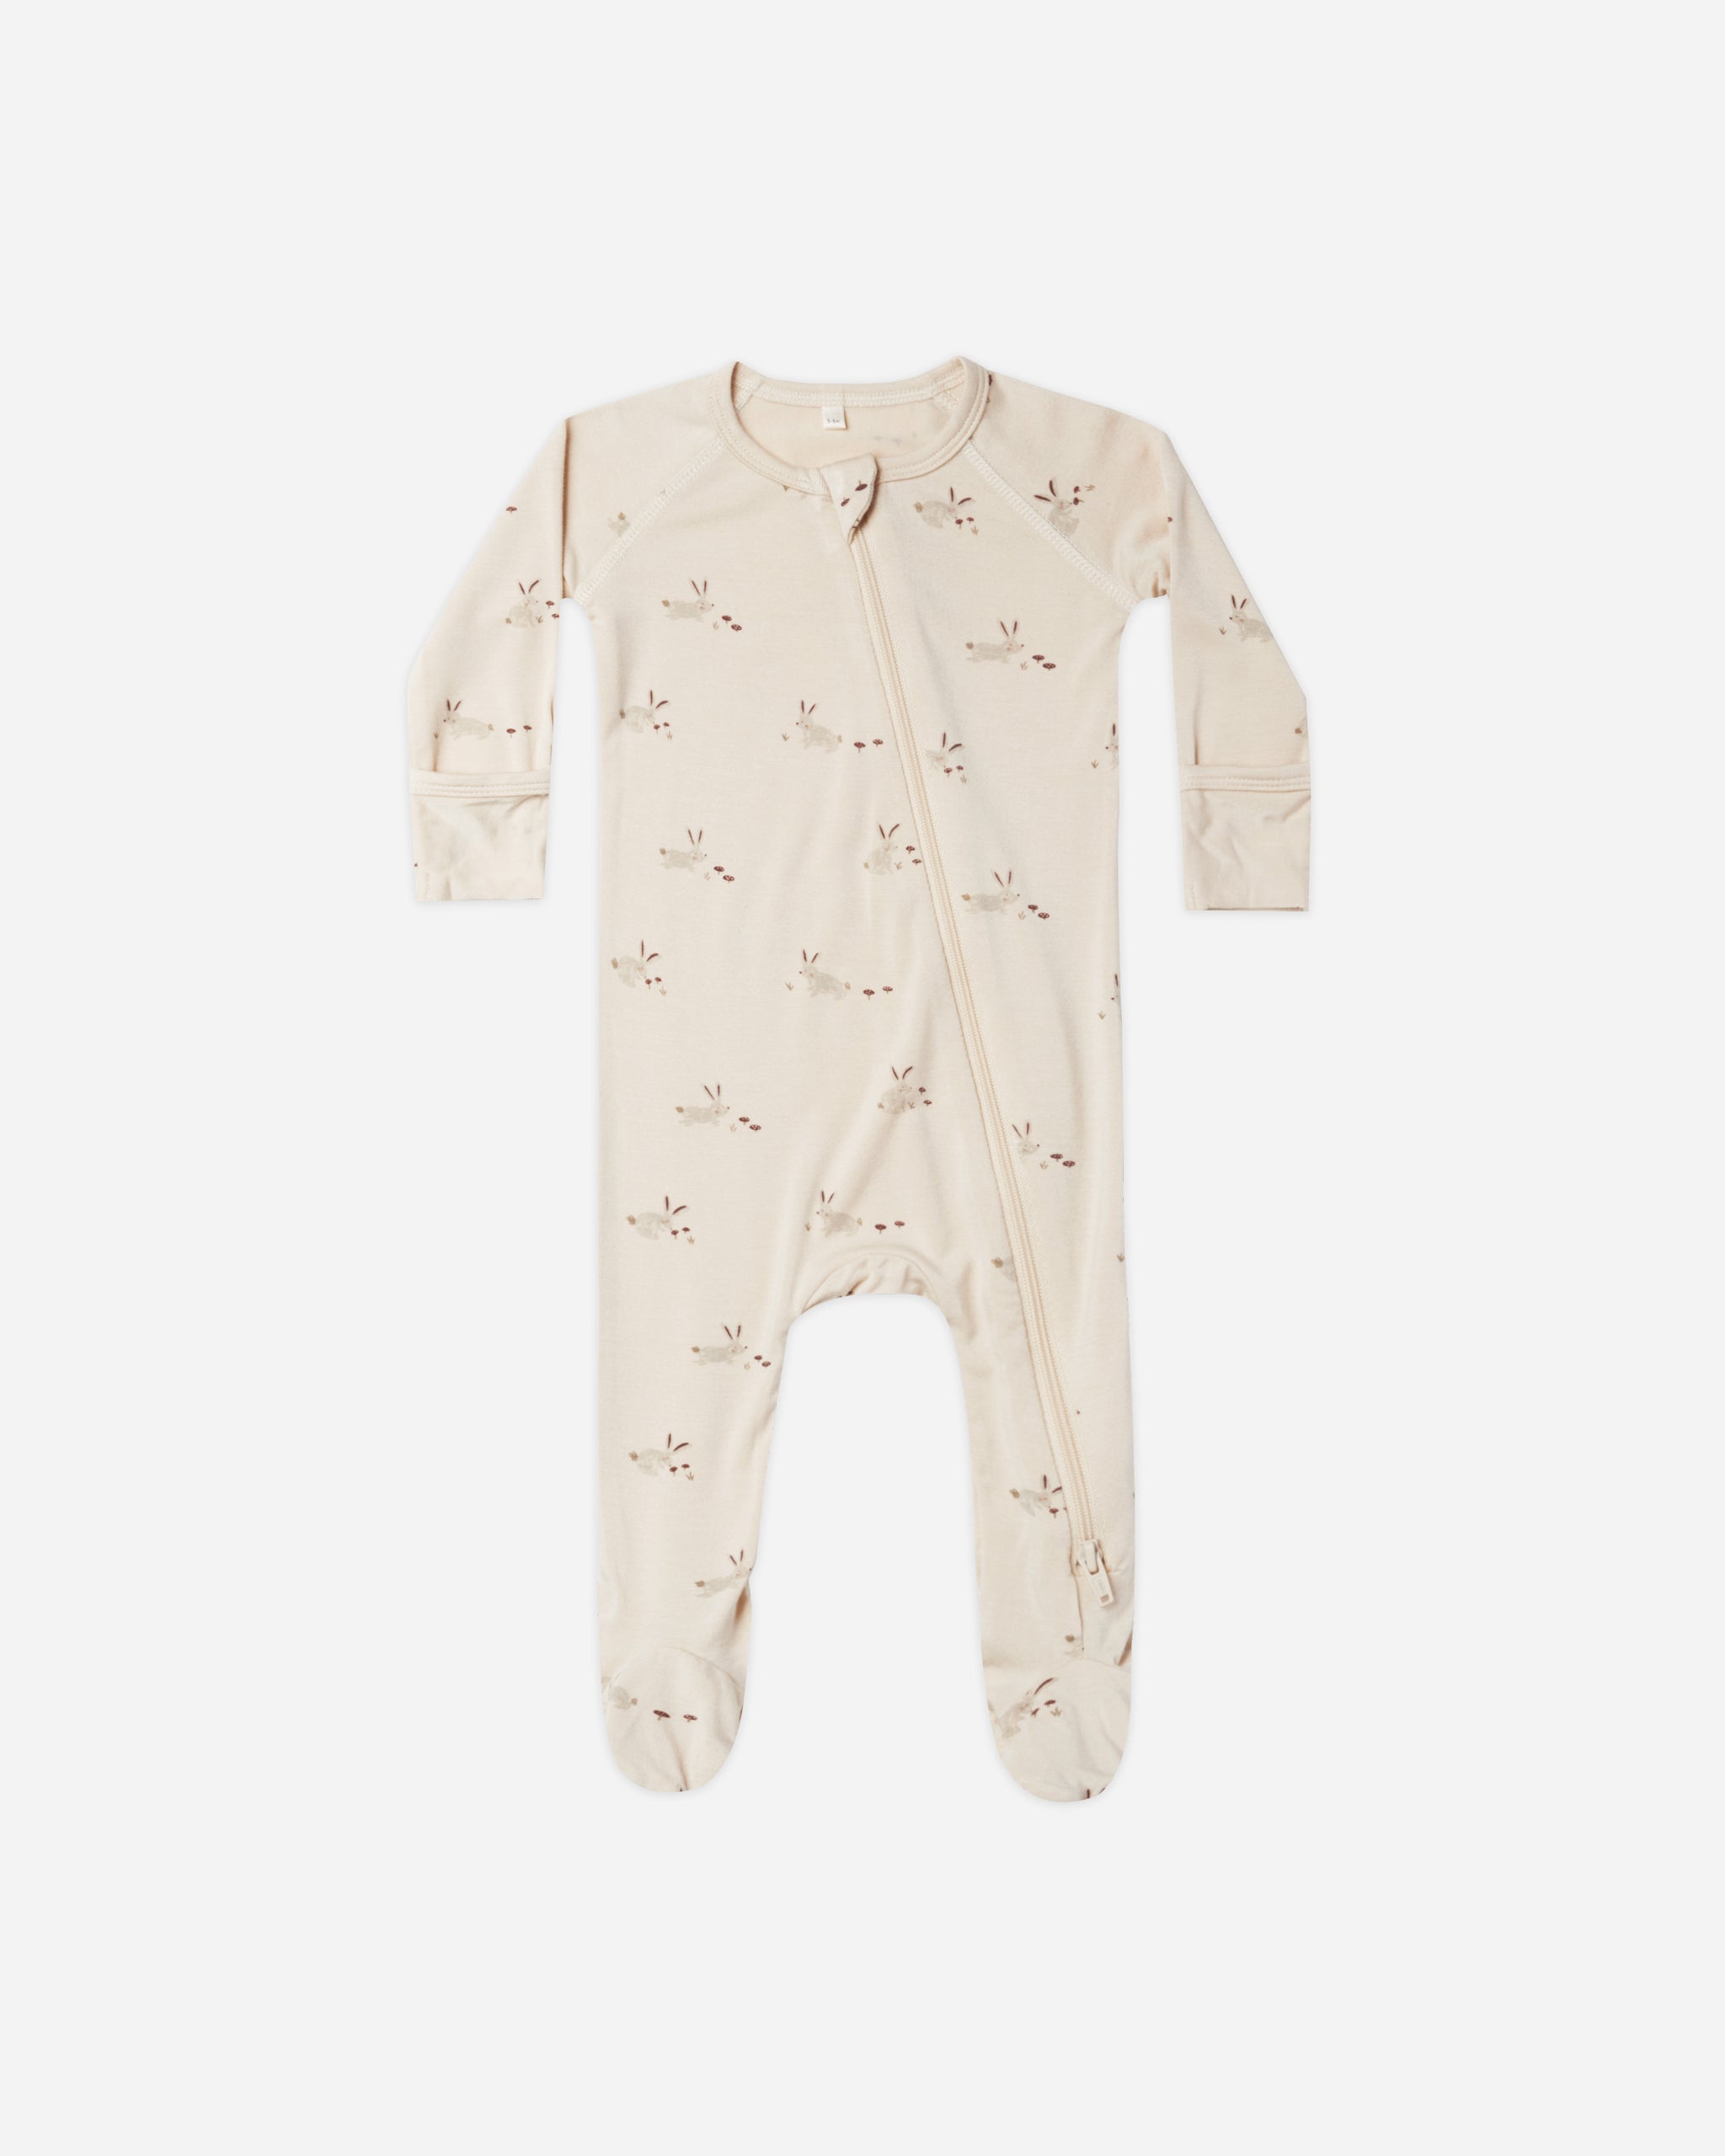 Bamboo Zip Footie || Bunnies - Rylee + Cru | Kids Clothes | Trendy Baby Clothes | Modern Infant Outfits |